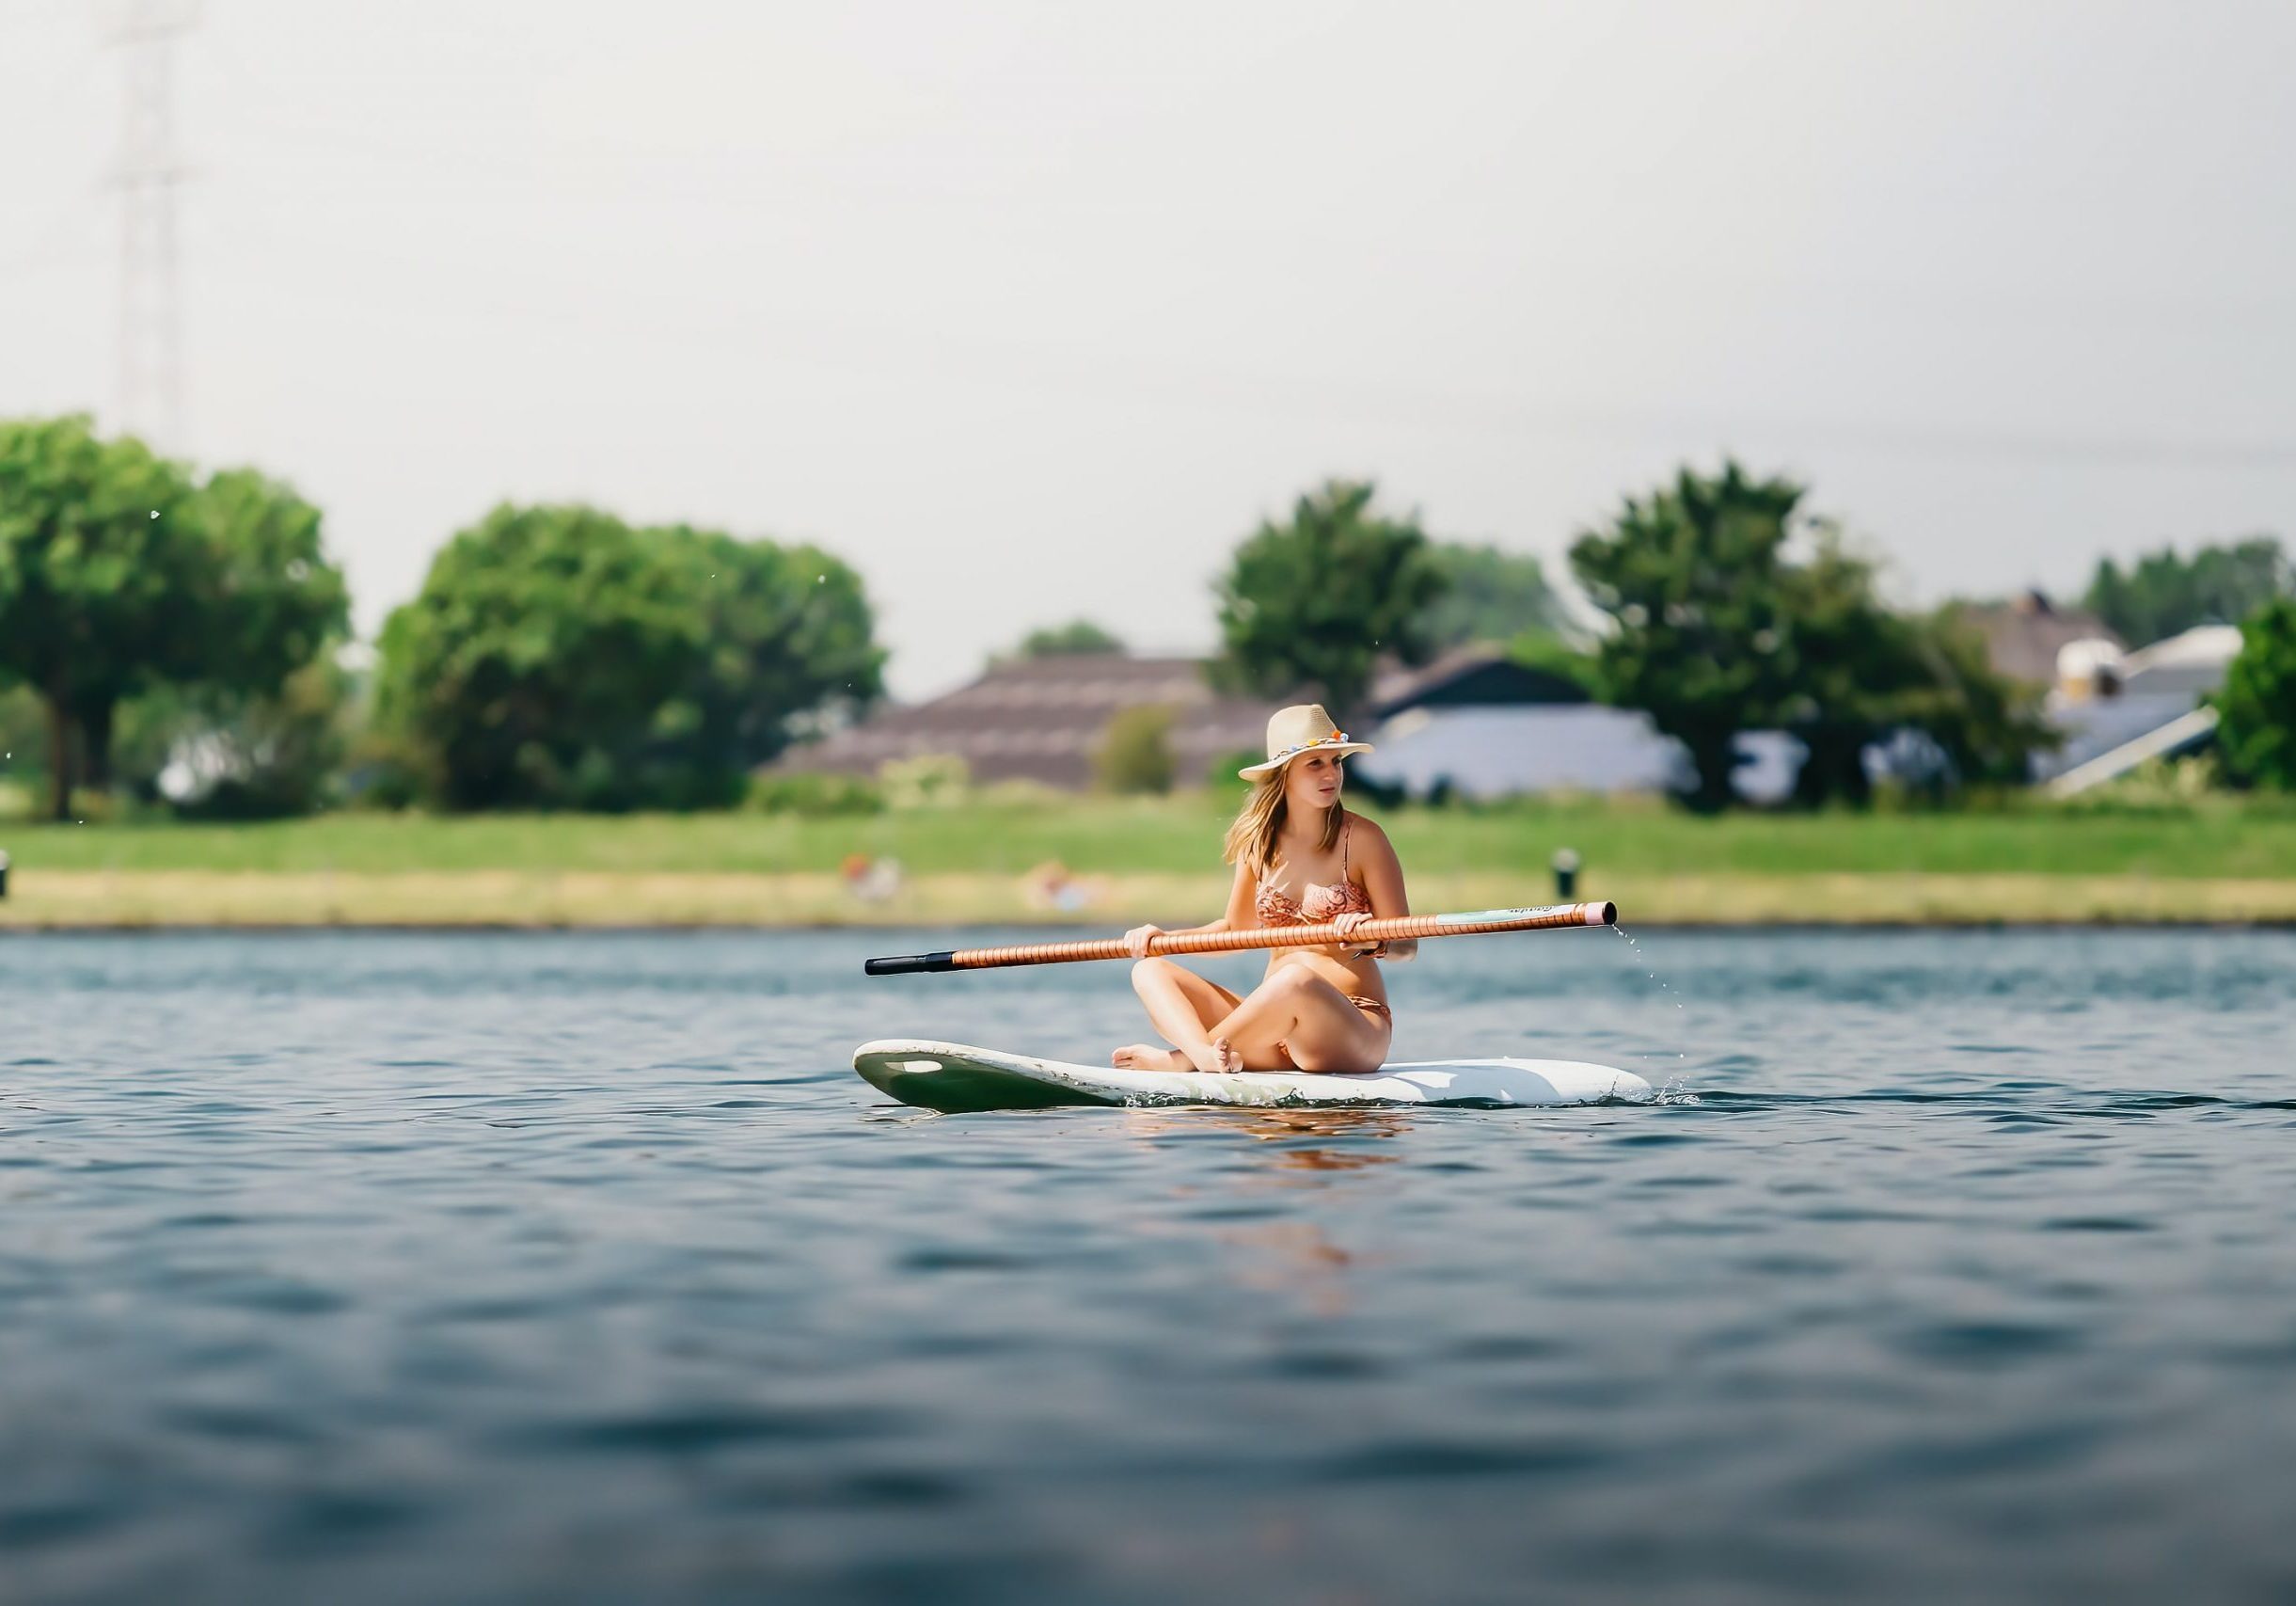 Girl sitting on a paddleboard